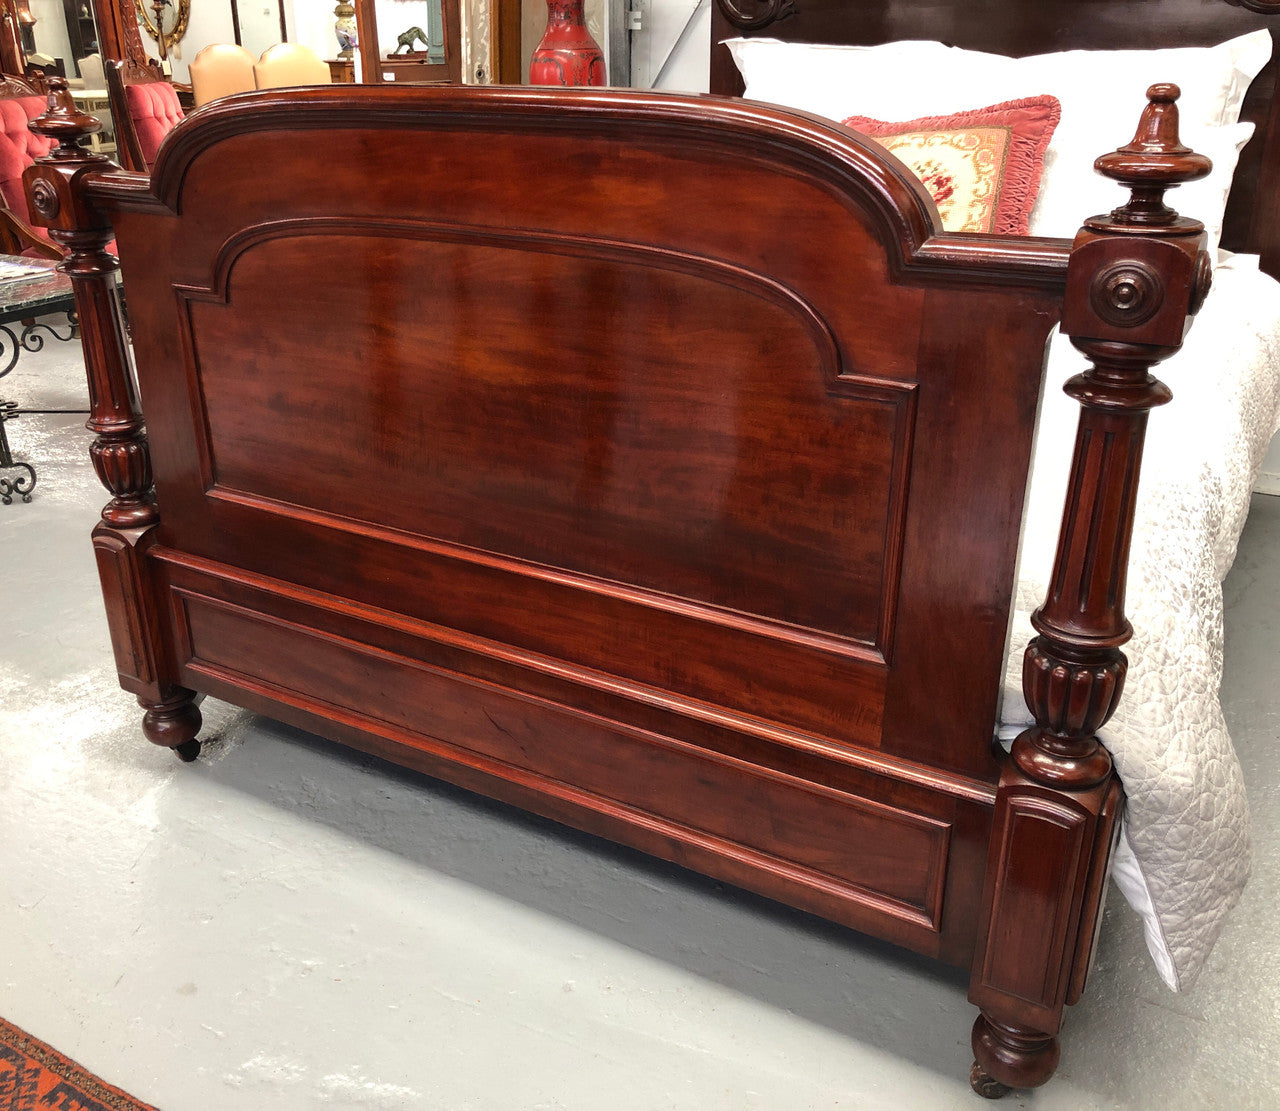 Antique Carved Mahogany Half Tester Poster Bed